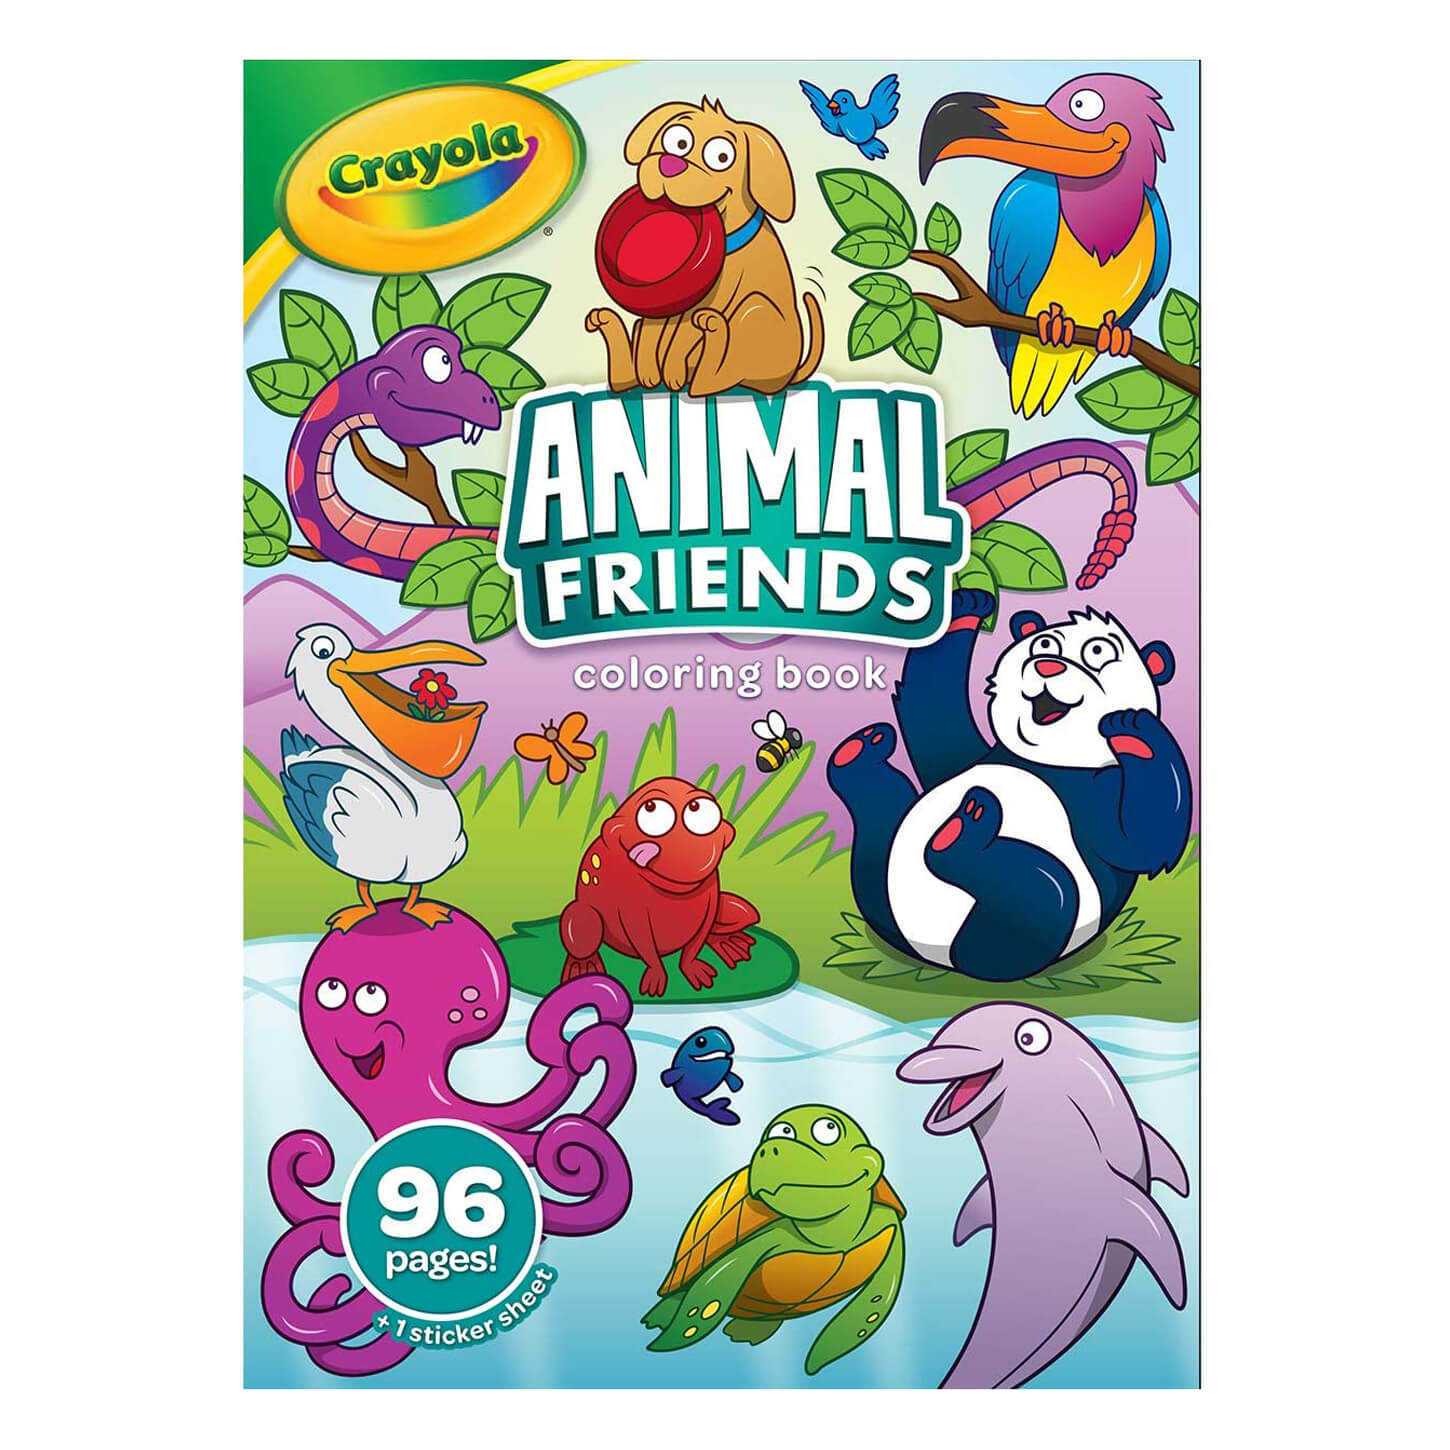 Crayola Animal Friends Colouring Book 96 Pages